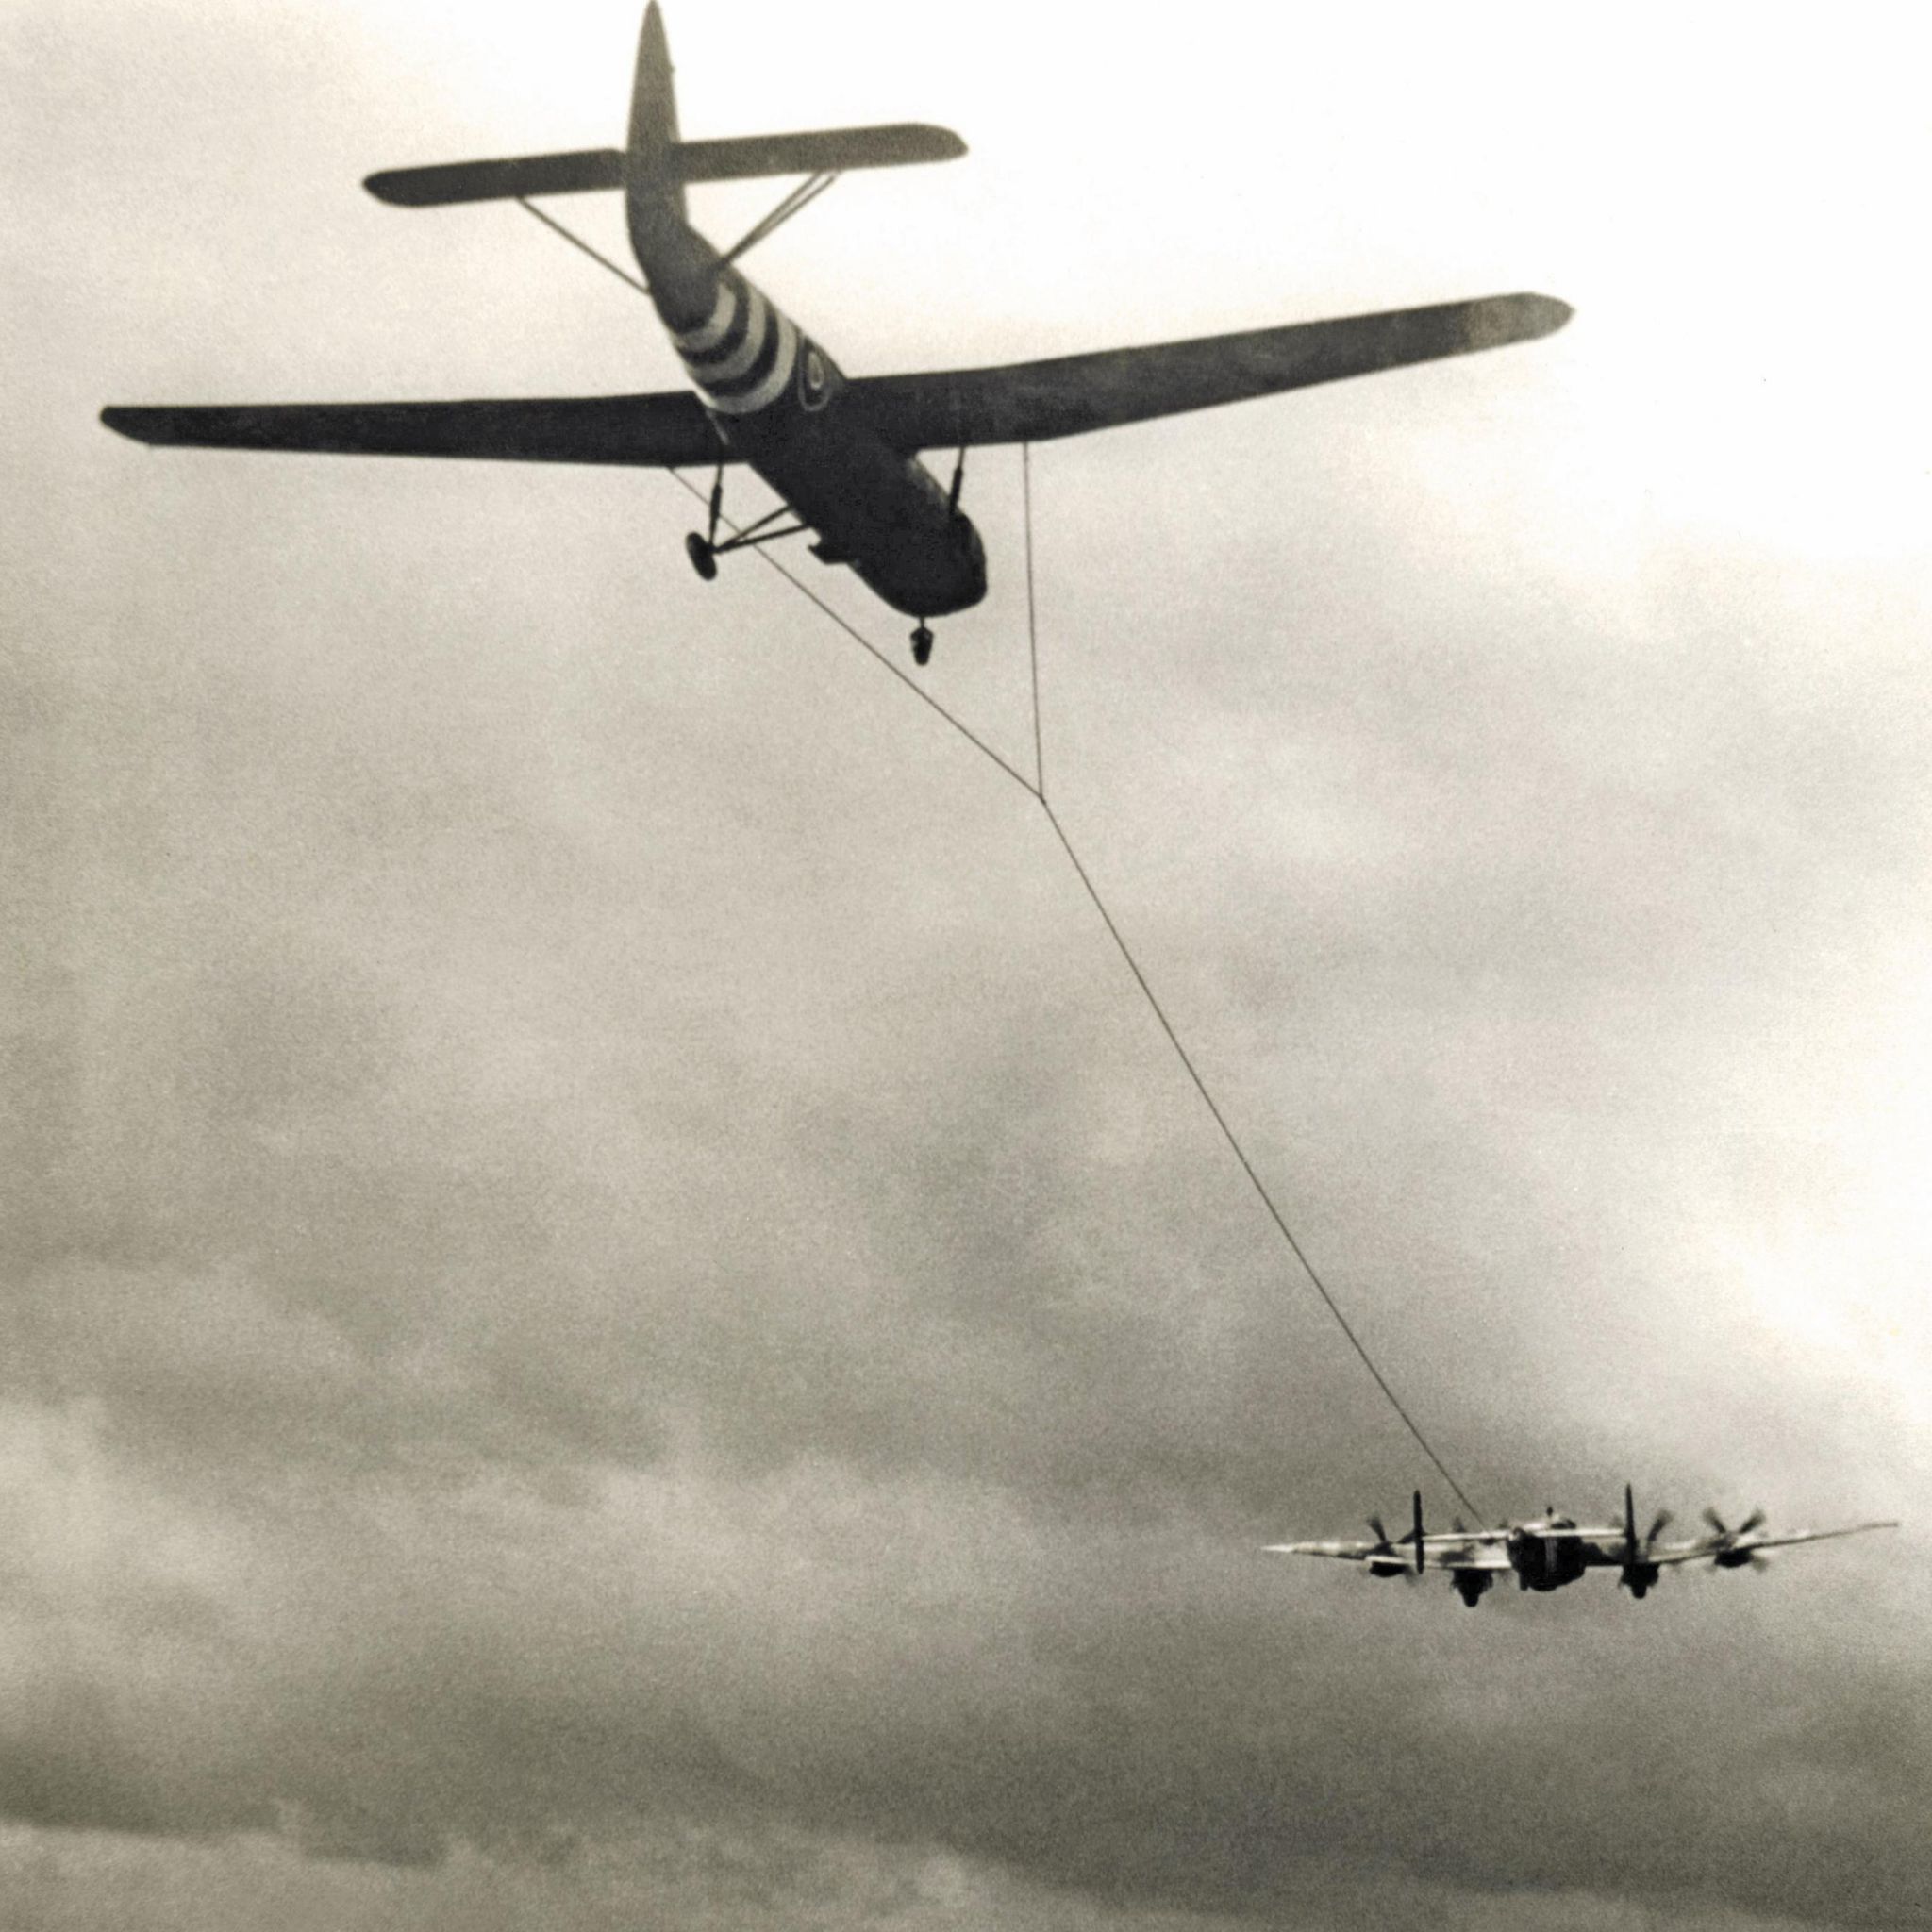 A World War Two glider being towed by a bomber